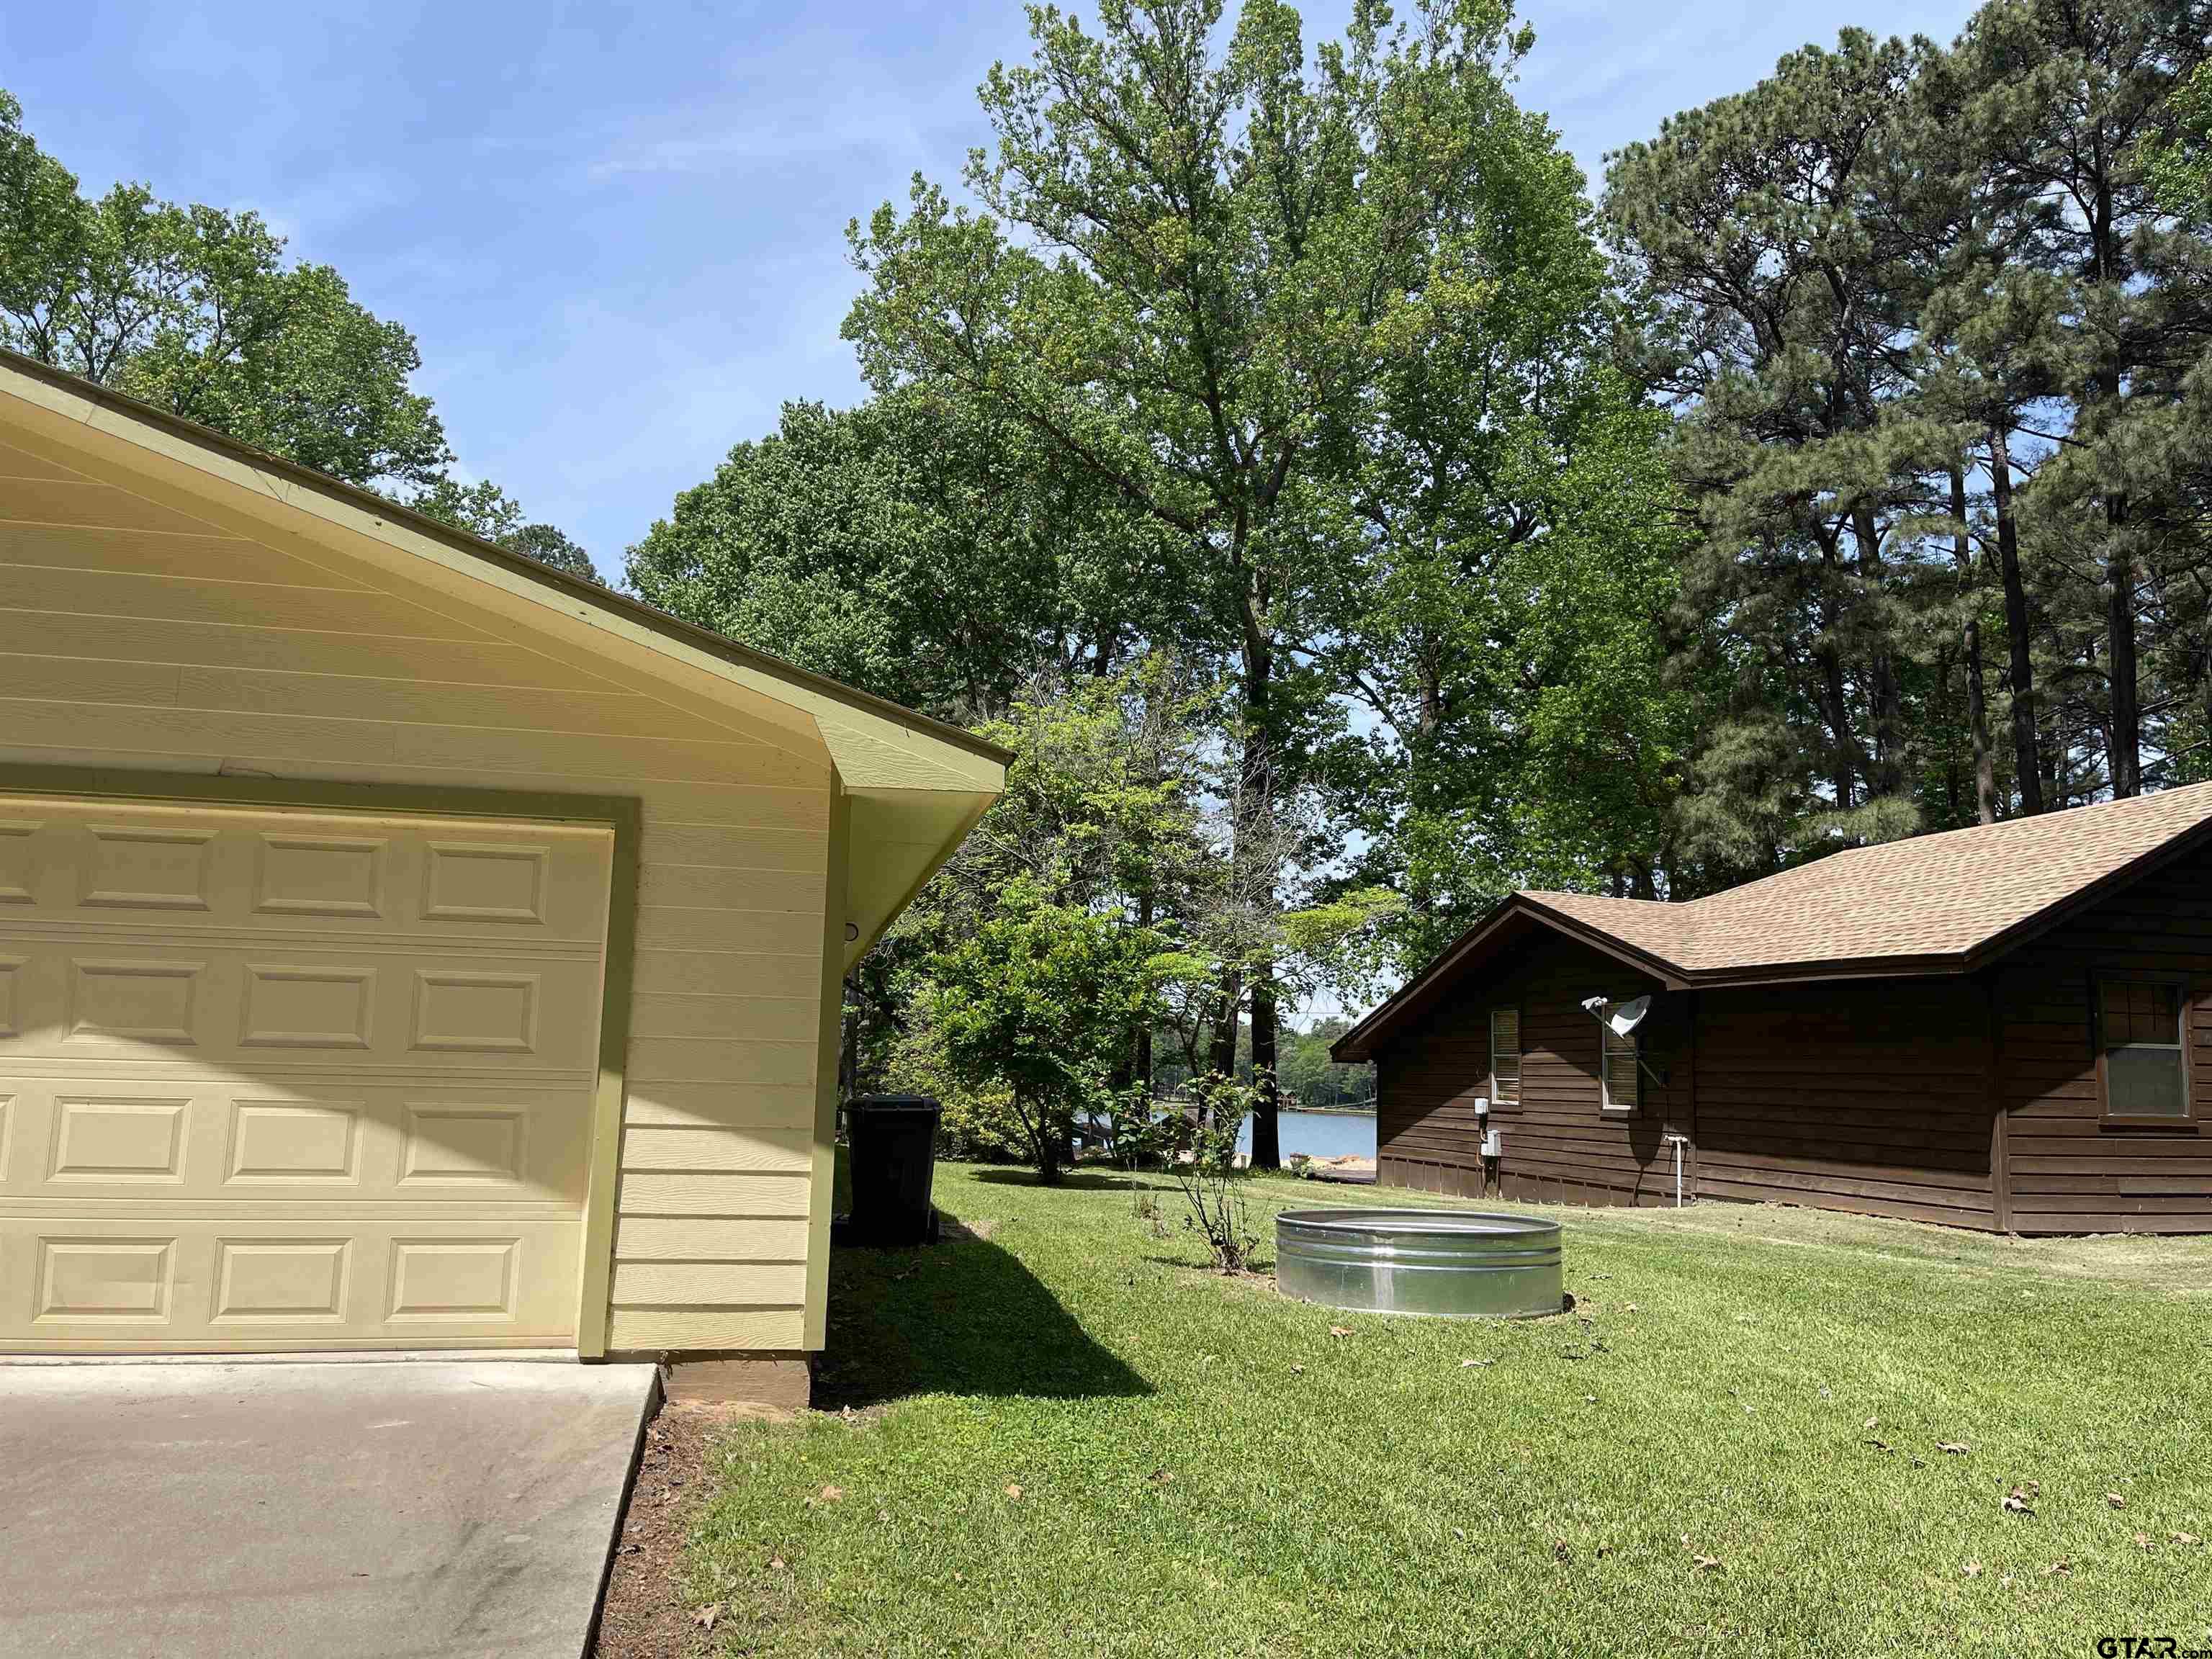 275 Lake Drive, Mt Vernon, Texas 75457, 3 Bedrooms Bedrooms, ,2 BathroomsBathrooms,Single Family Detached,For Sale,Lake Drive,23009595